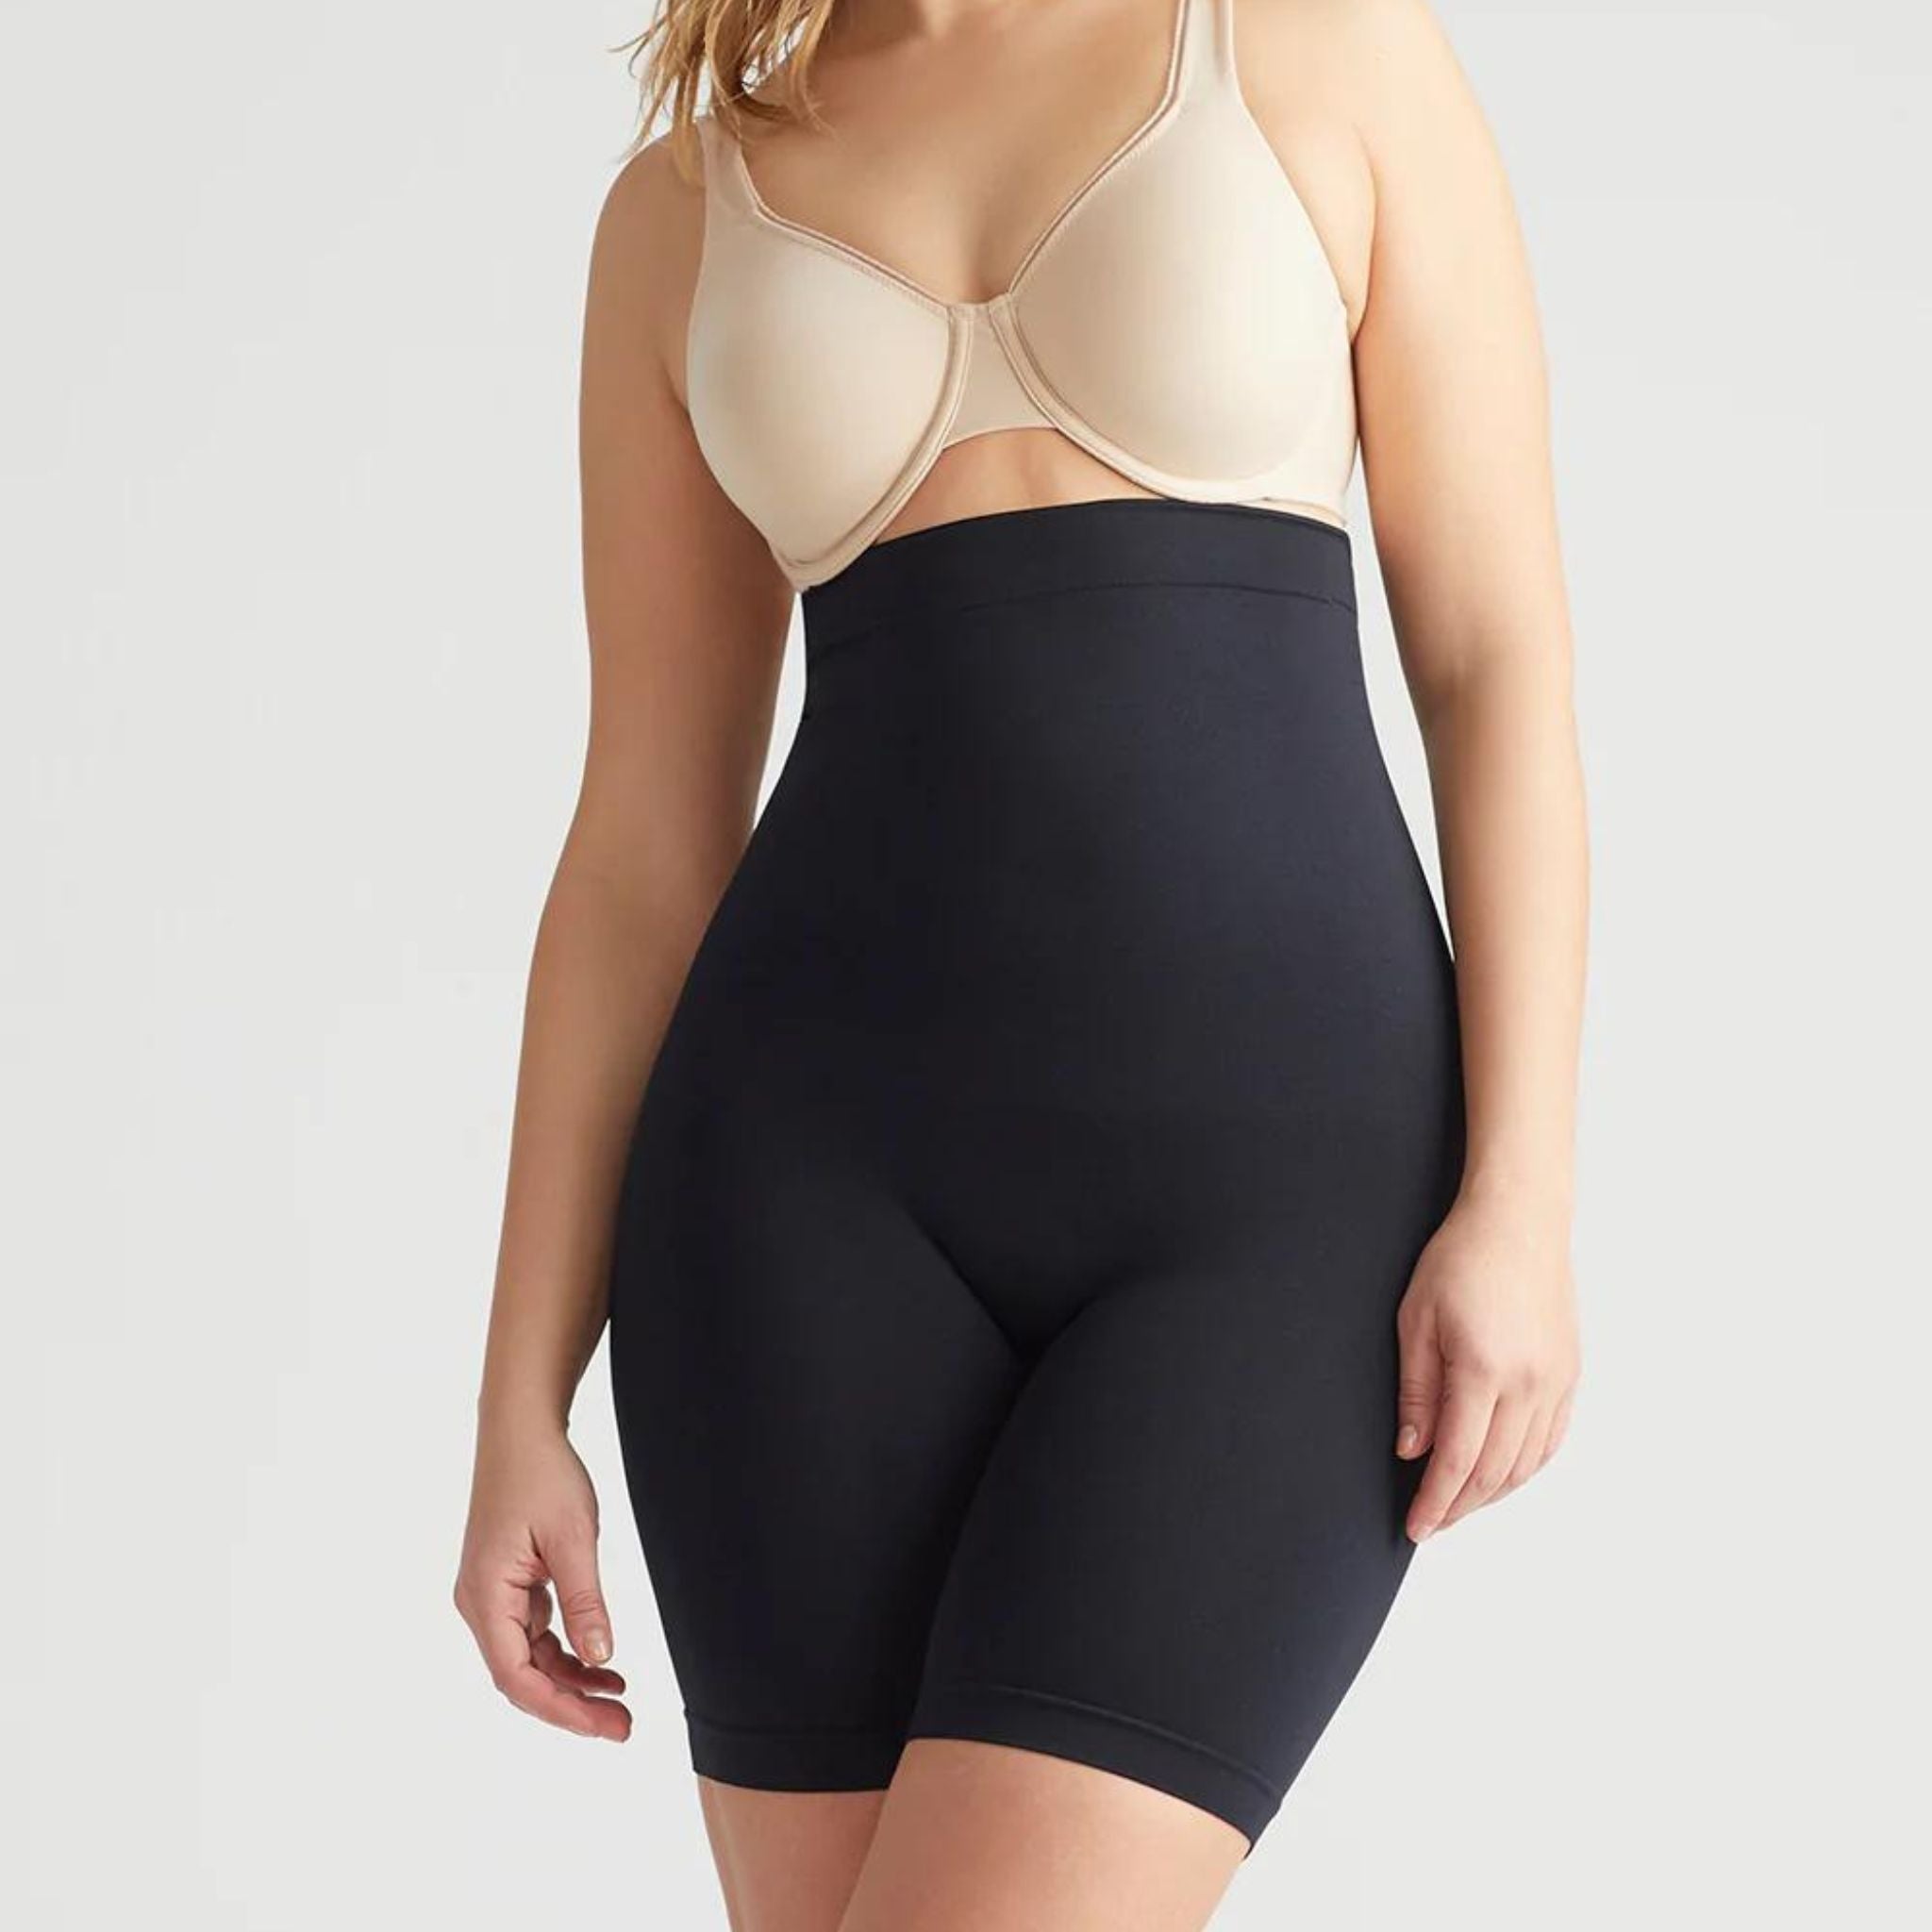 This high waist thigh shaper offers coverage and support through the hips and thighs, plus our Yummie Hug smooths your tummy.  Level 4 firm shaping Targeted waist and thigh shaping Seamless styling gives you complete allover smoothing Smooths and shapes comfortably everyday Soft silicone at waist provides no-slip confidence High-waist design sits just below the bra line